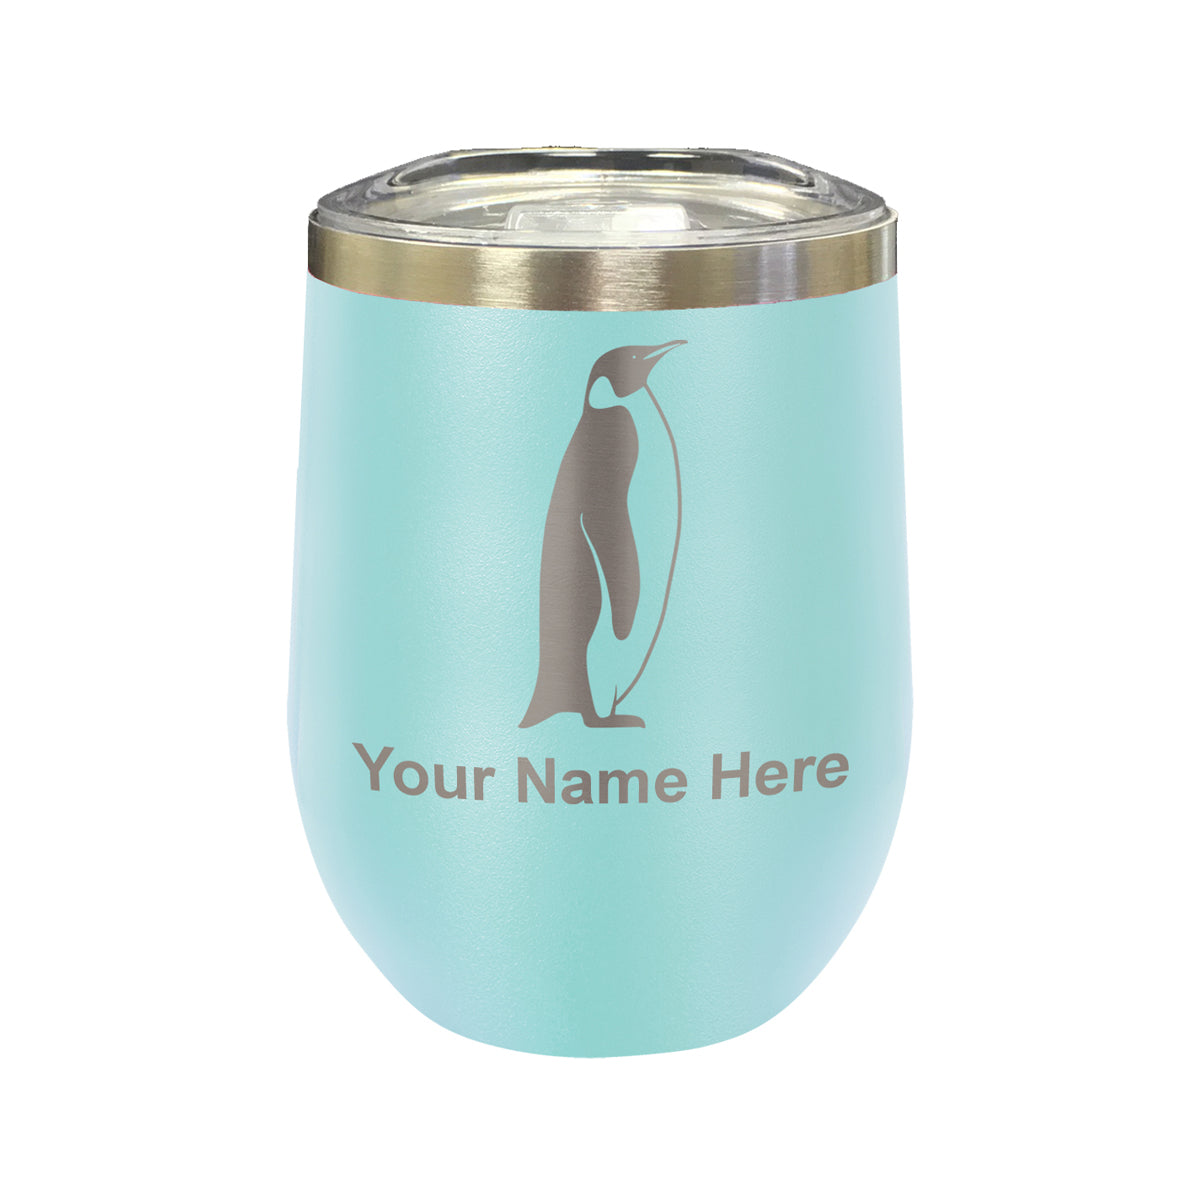 LaserGram Double Wall Stainless Steel Wine Glass, Penguin, Personalized Engraving Included